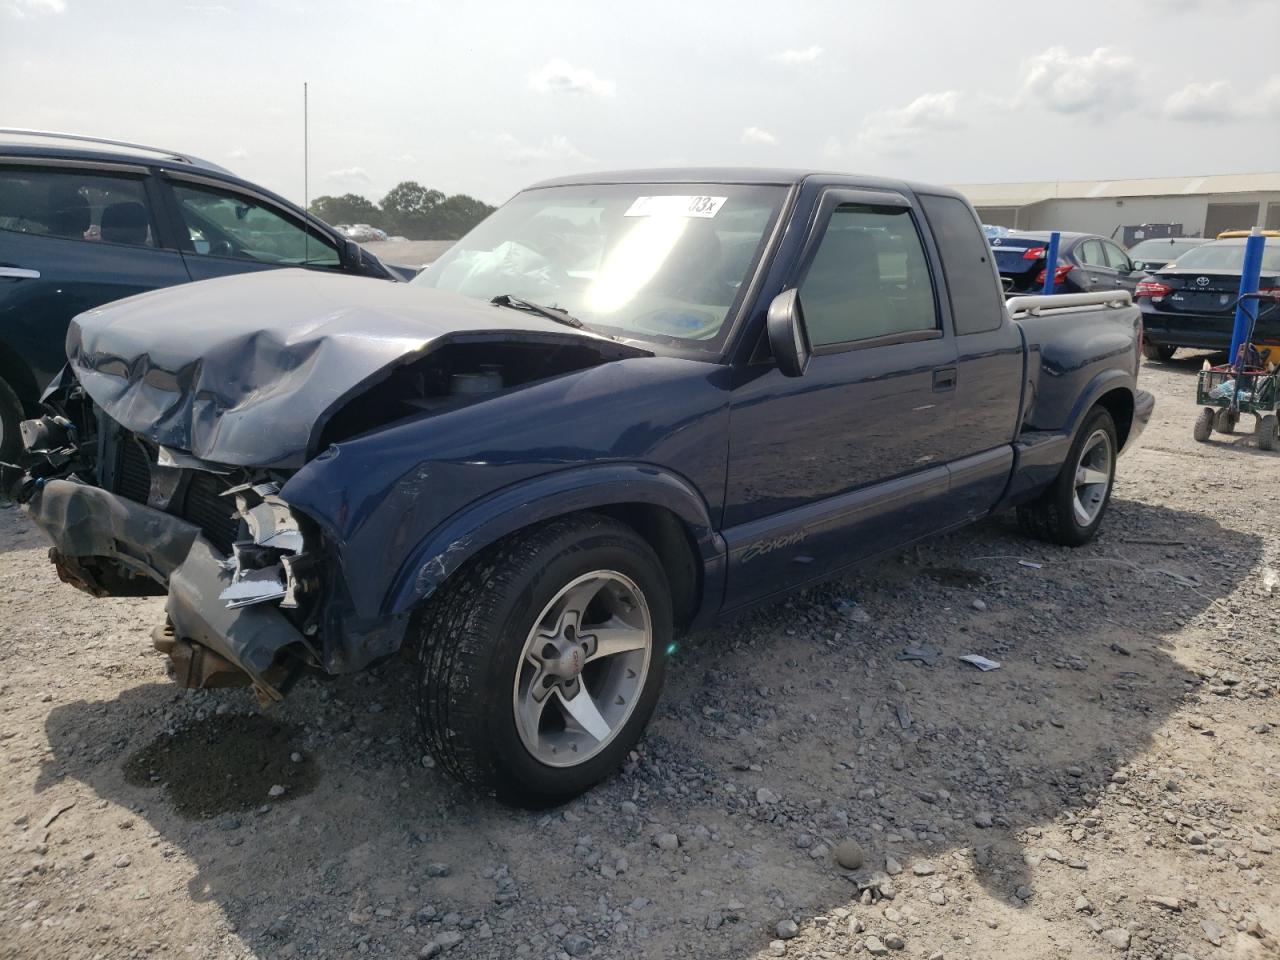 vin: 1GTCS19X838128960 1GTCS19X838128960 2003 gmc sonoma 4300 for Sale in 37354 6763, Tn - Knoxville, Madisonville, USA